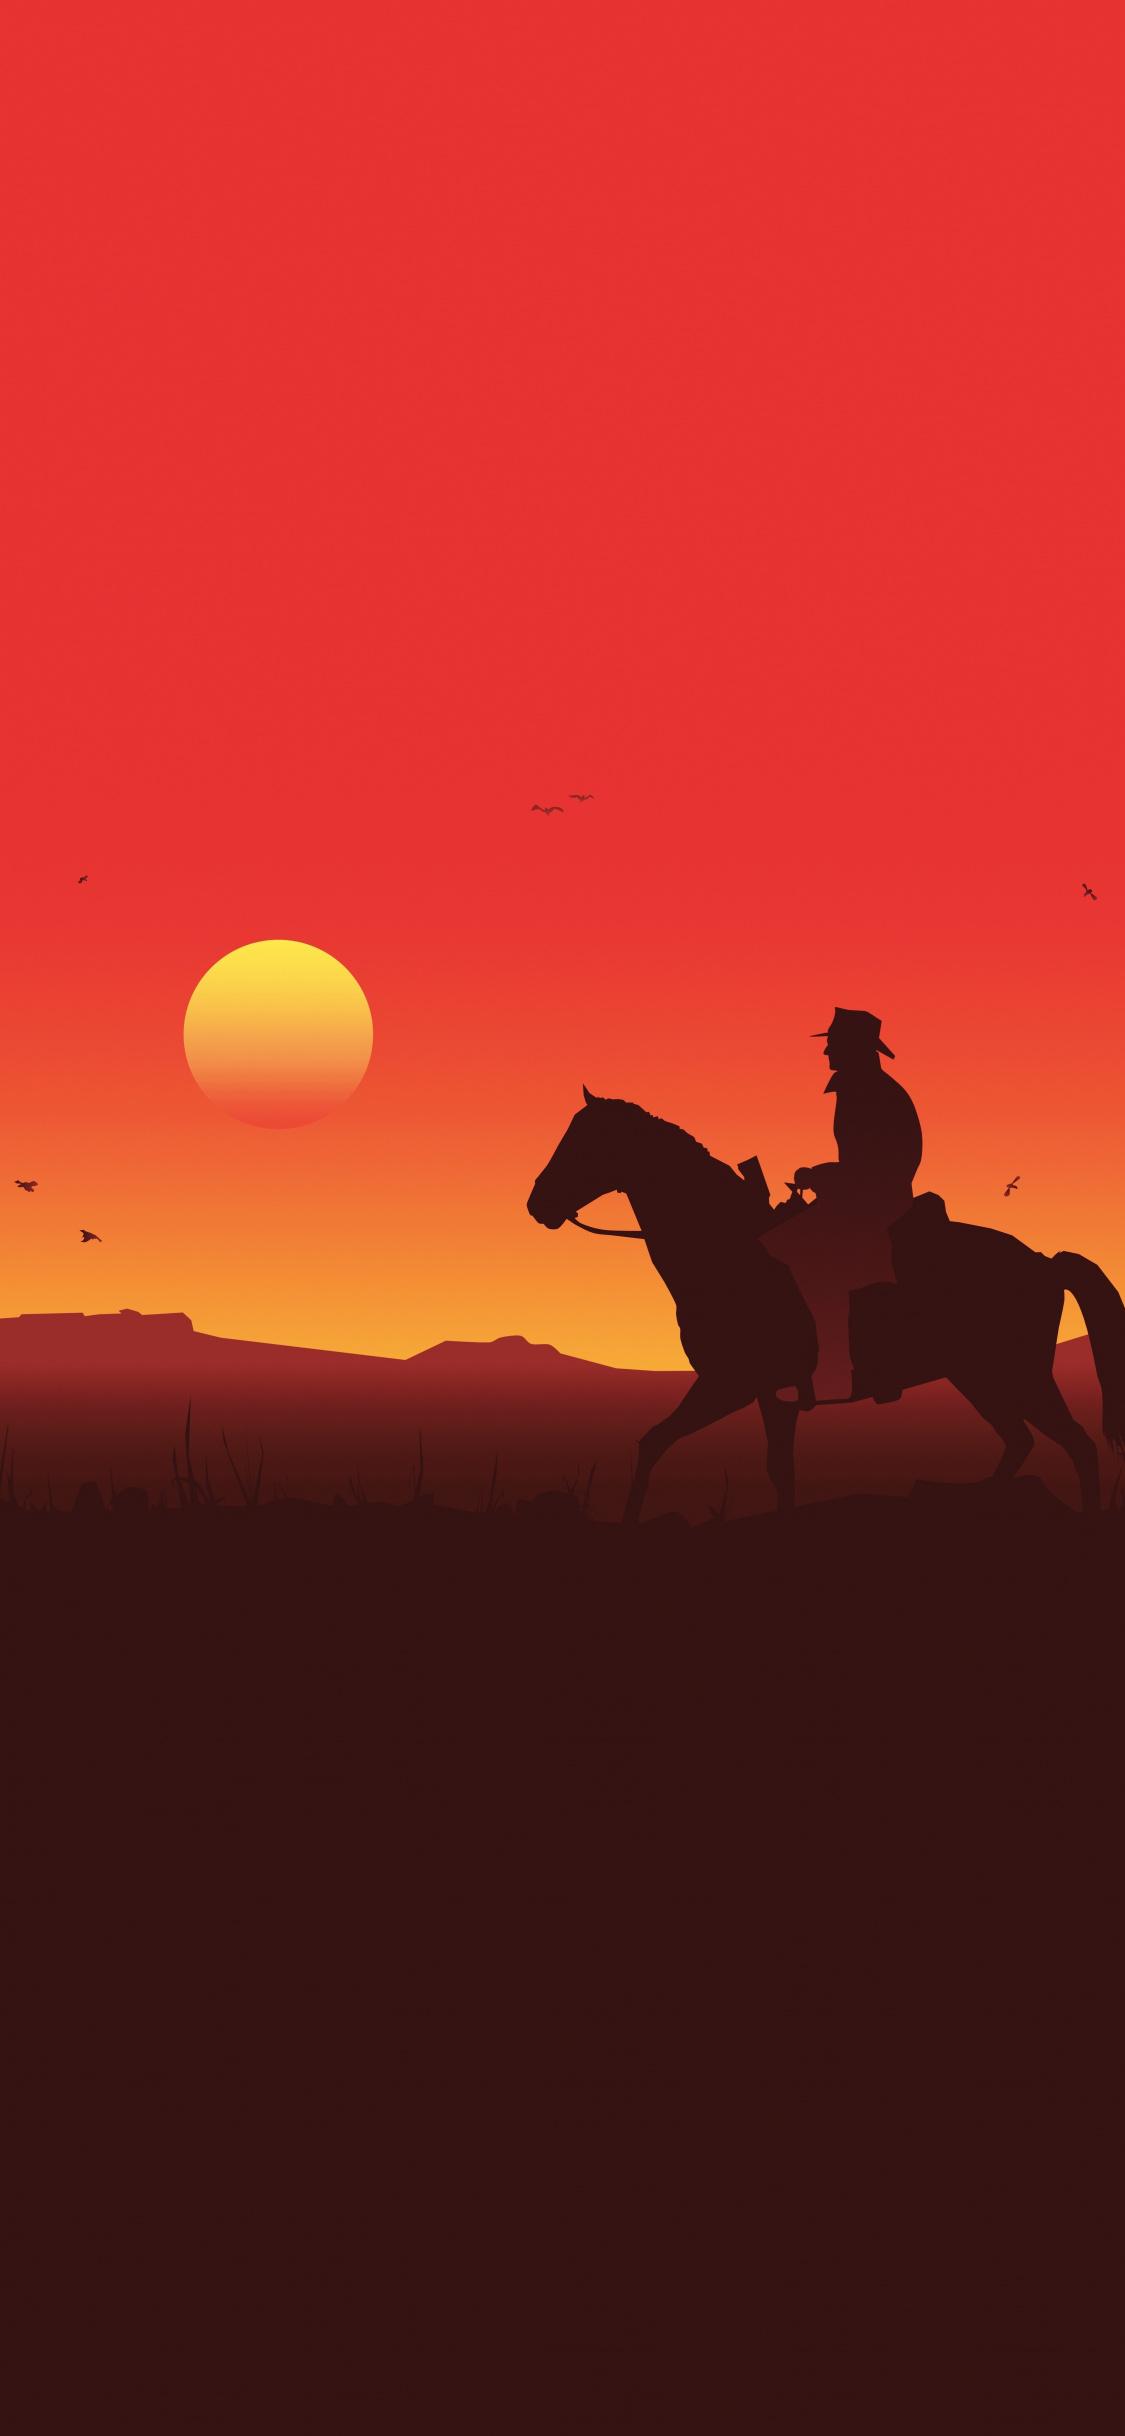 Red Dead Redemption 2 Smartphone Wallpapers - Wallpaper Cave